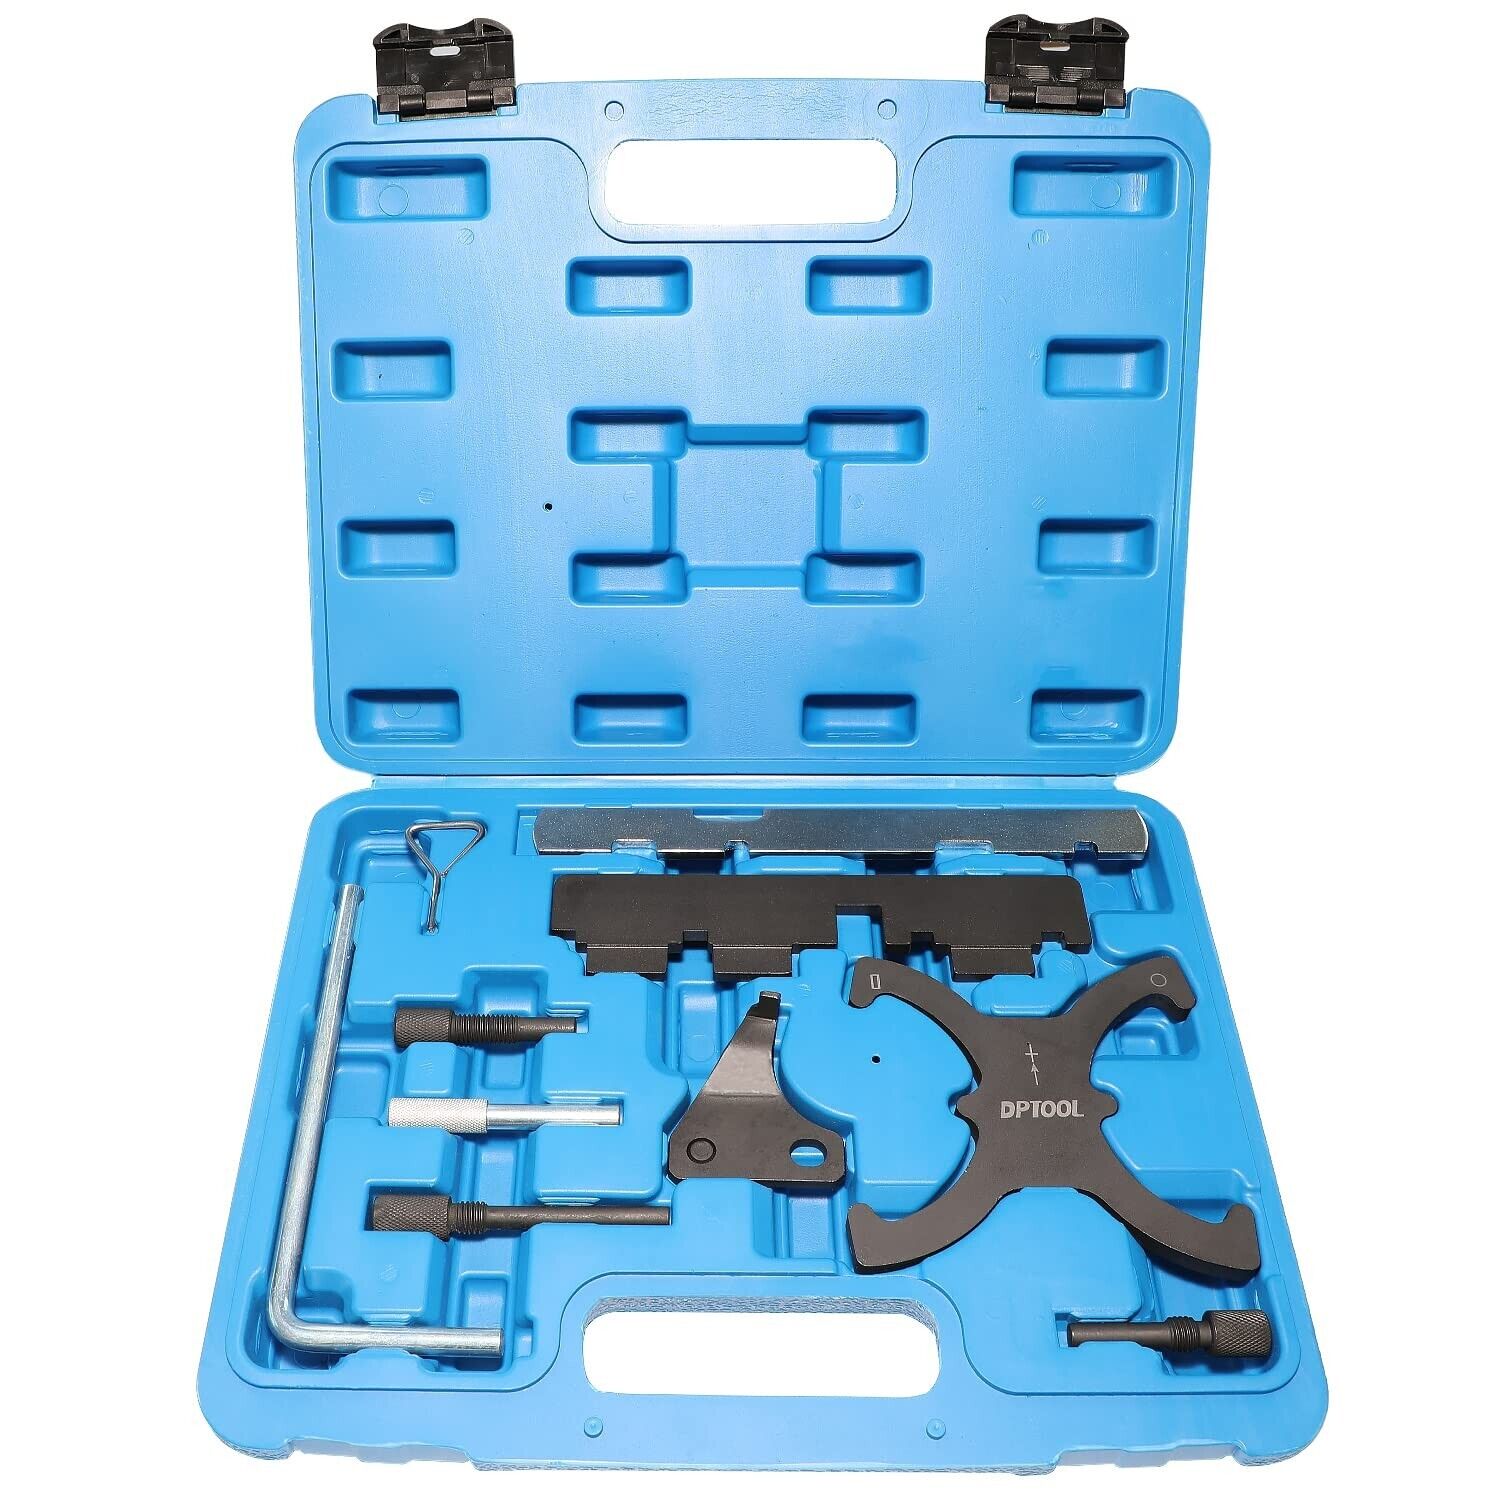 Camshaft Timing Locking Tool Kit Compatible with Ford fusion Escape Focus Fie...